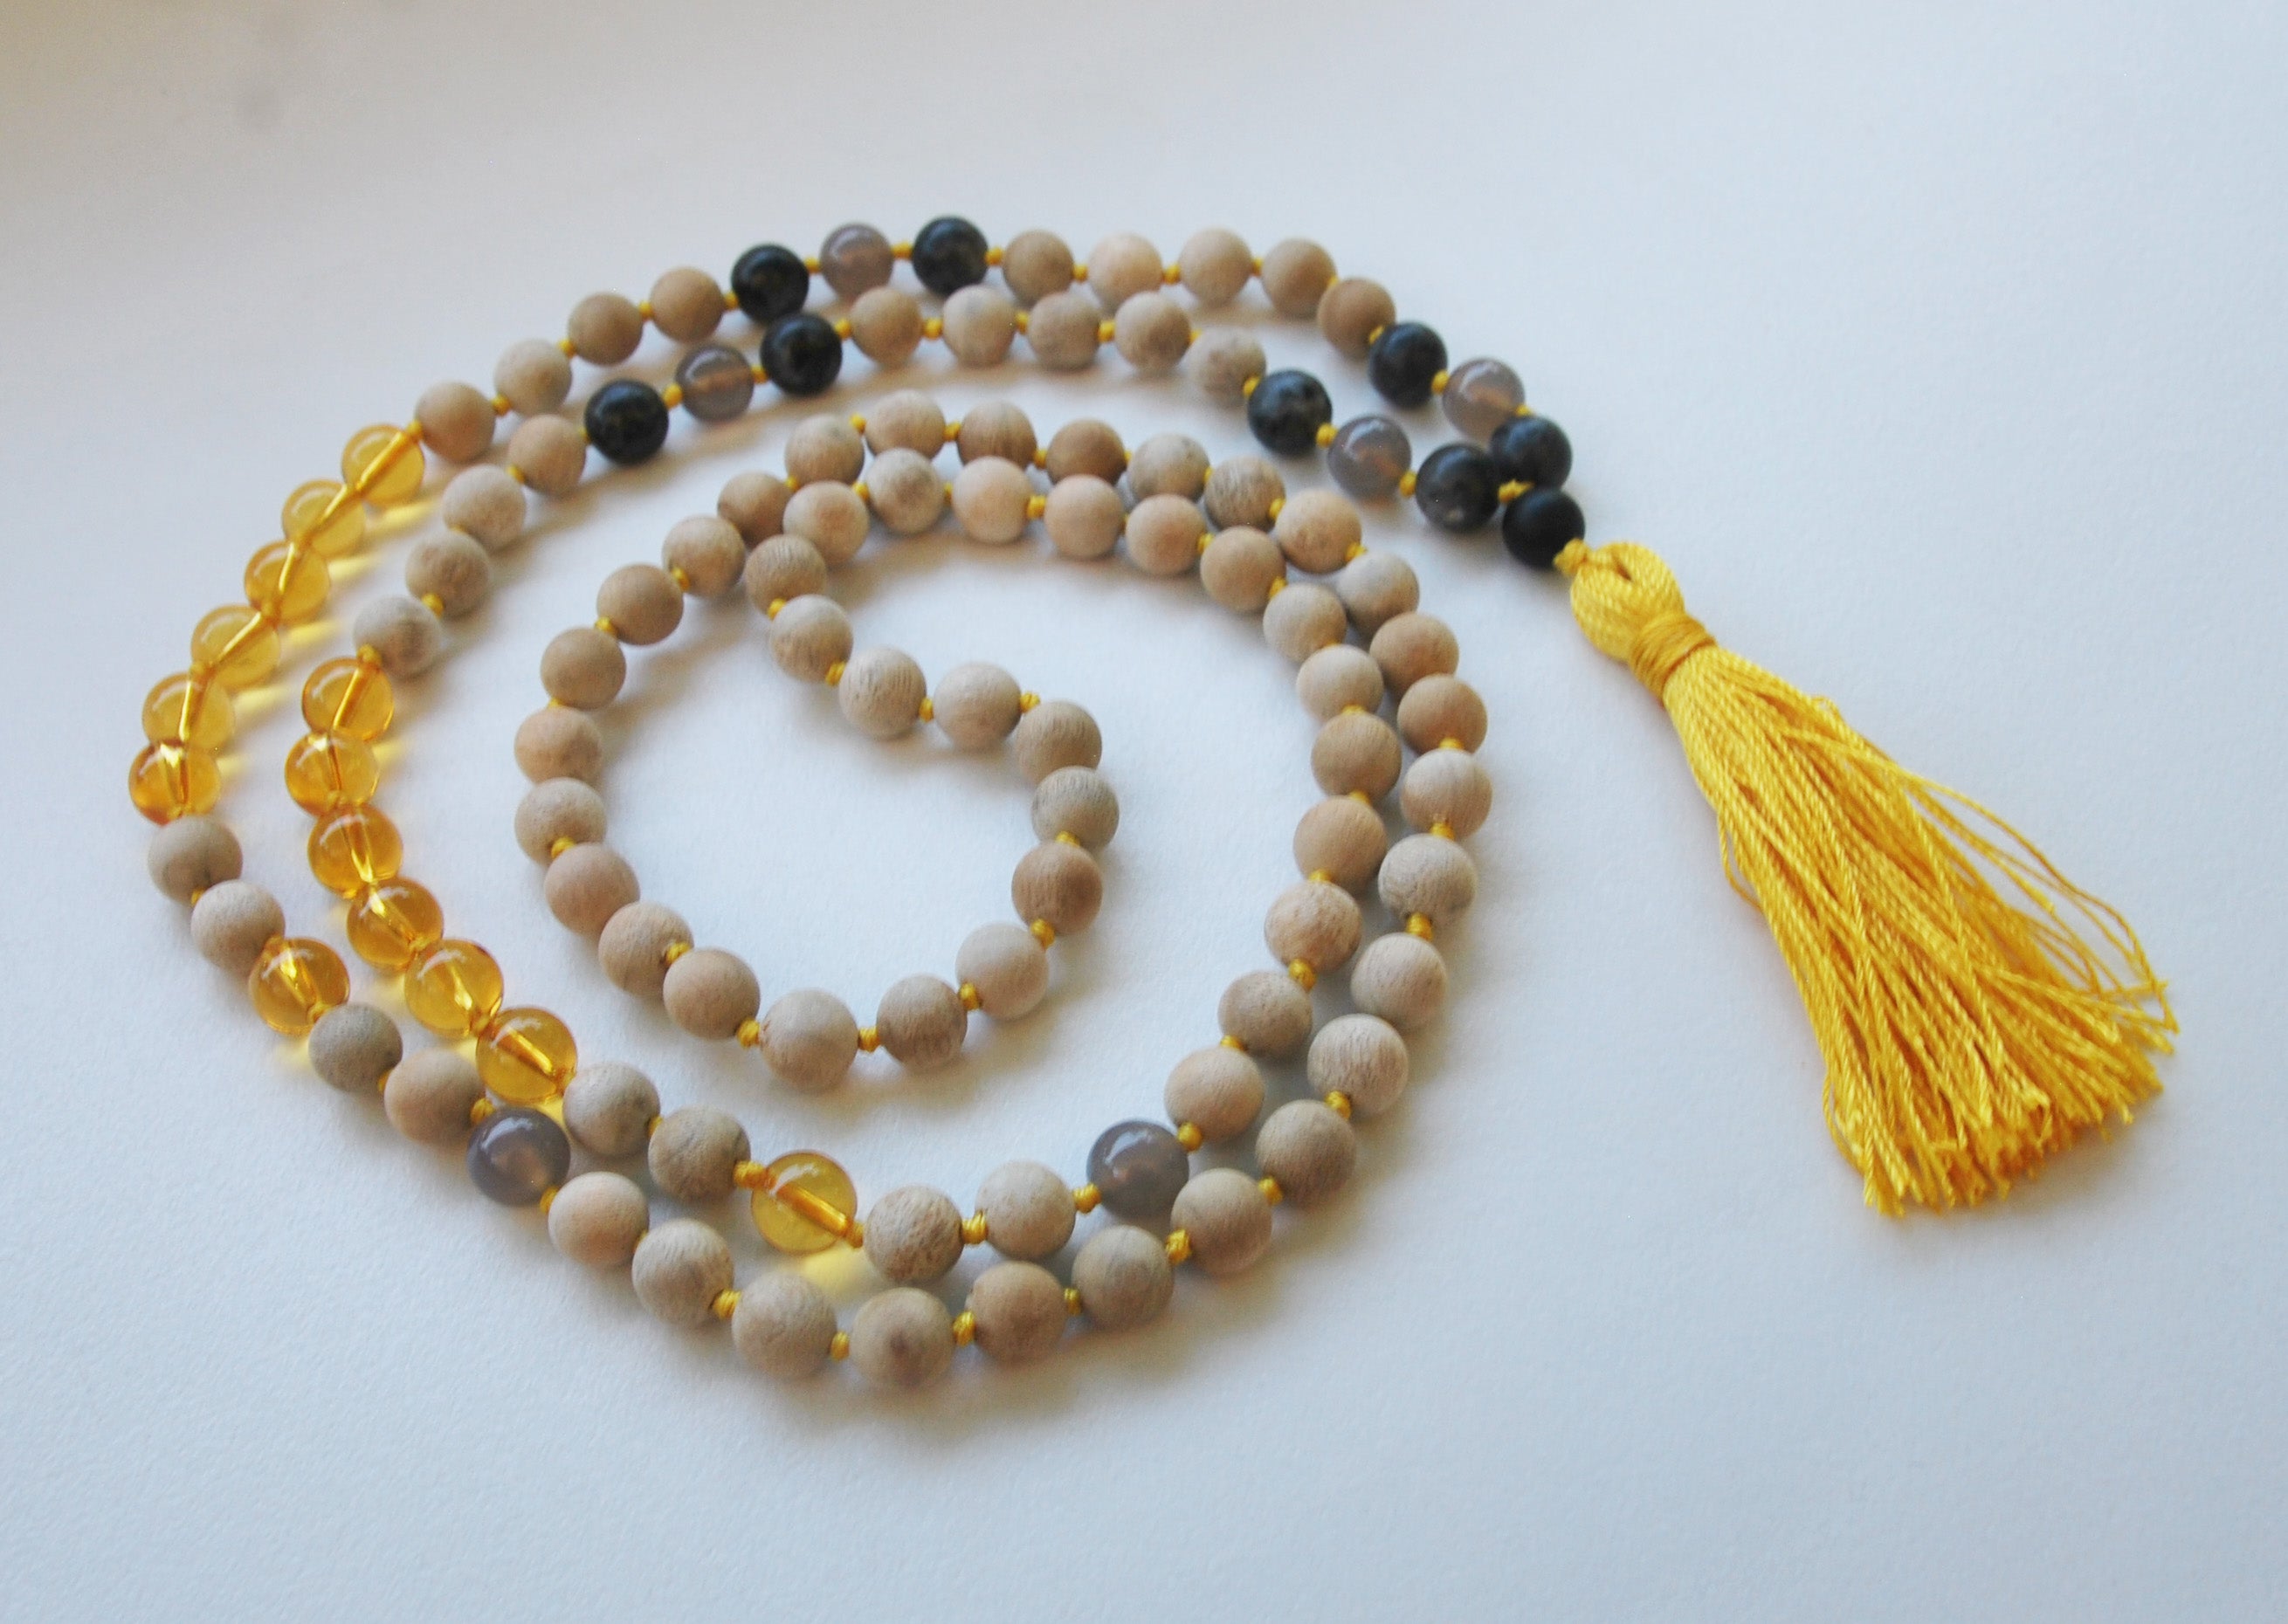 8mm Sandalwood & Citrine 108 Knotted Mala Necklace with Colored Tassel